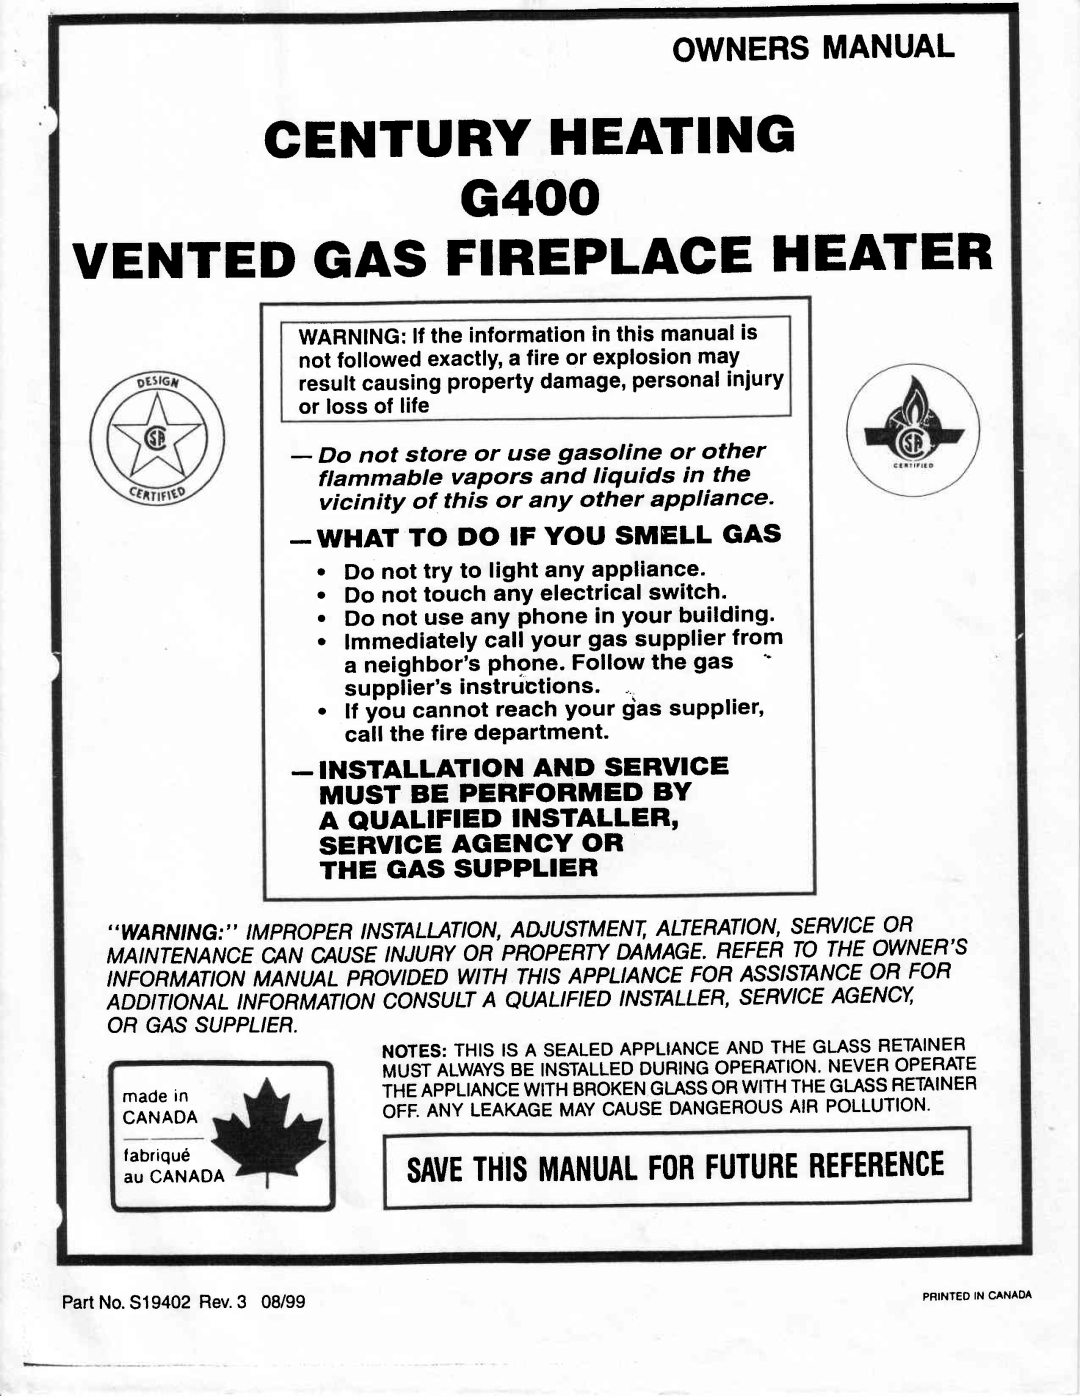 Vermont Casting G400 owner manual Ownersmanual, Genturyheating, Ventedgas Fireplageheater, Whatto Do If You Smell Gas 